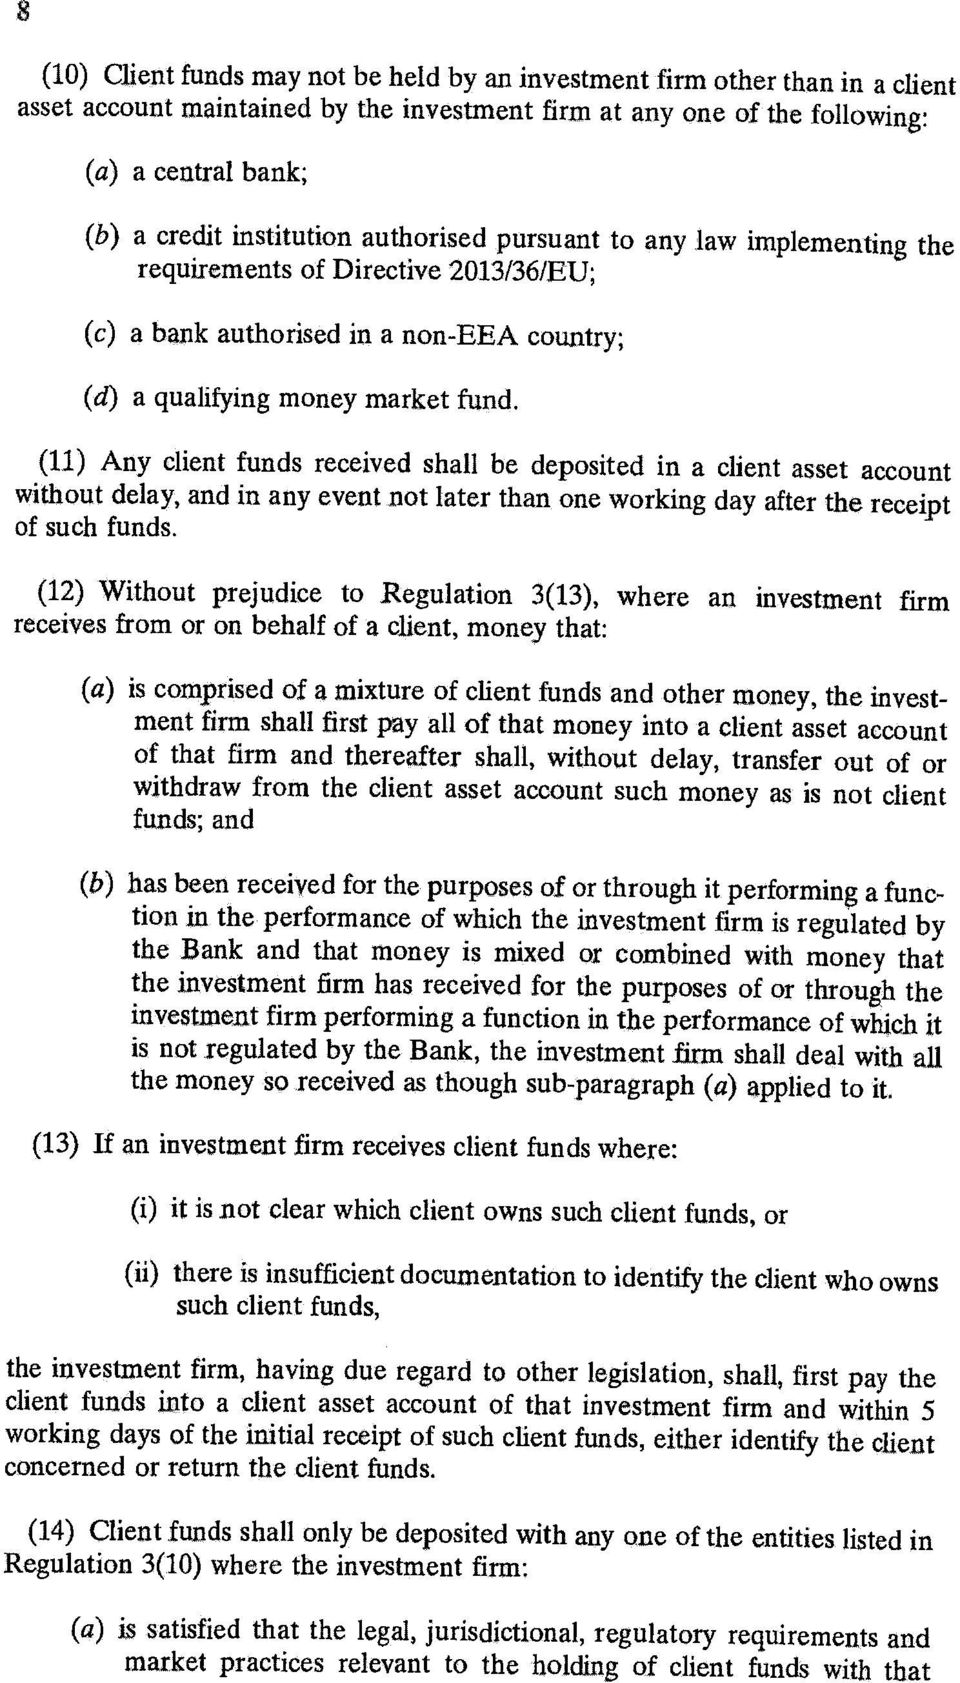 (11) Any client funds received shall be deposited in a client asset account without delay, and in any event not later than one working day after the receipt of such funds.